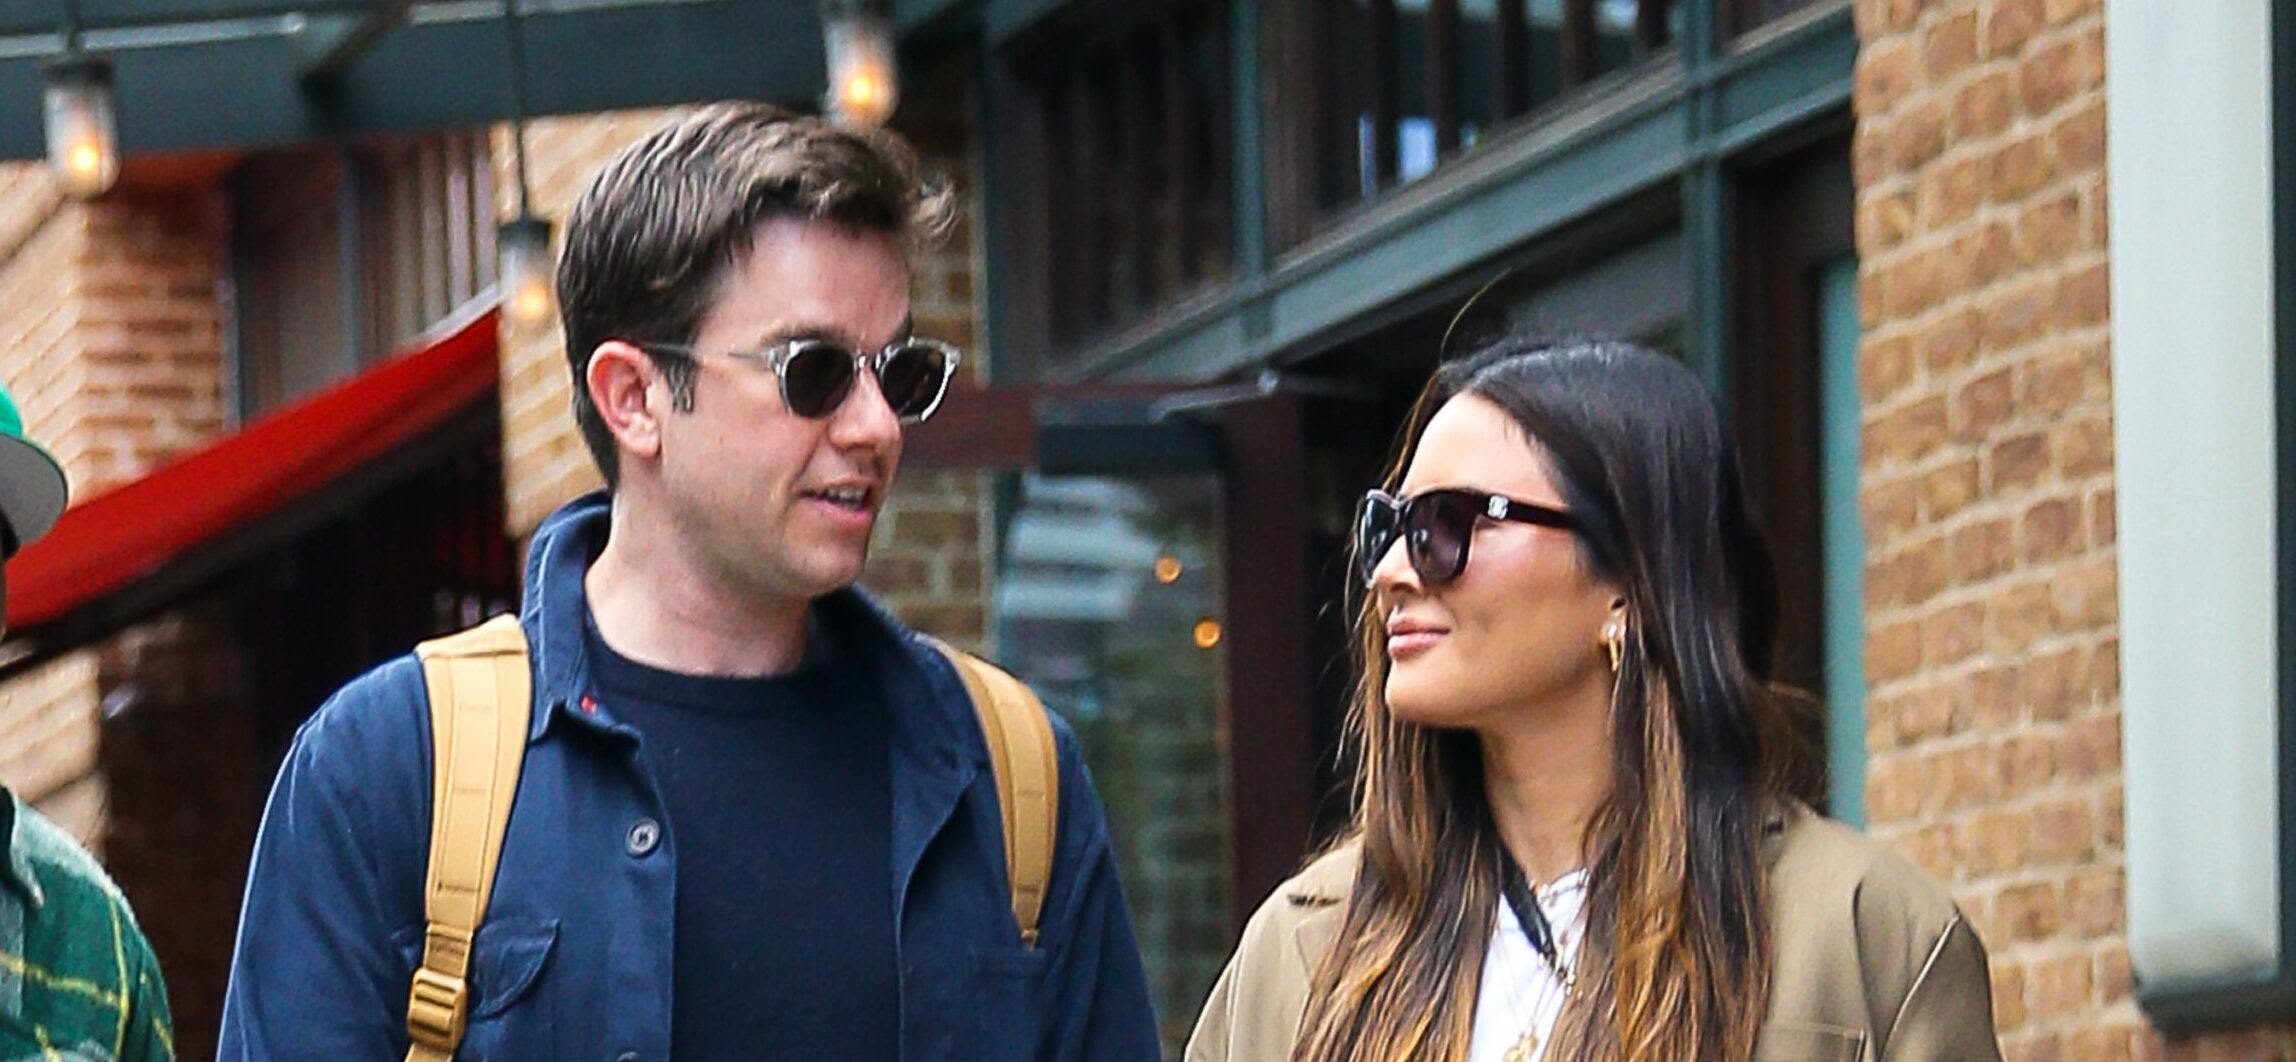 John Mulaney And Olivia Munn Secretly Tie The Knot After Fueling Marriage Rumors